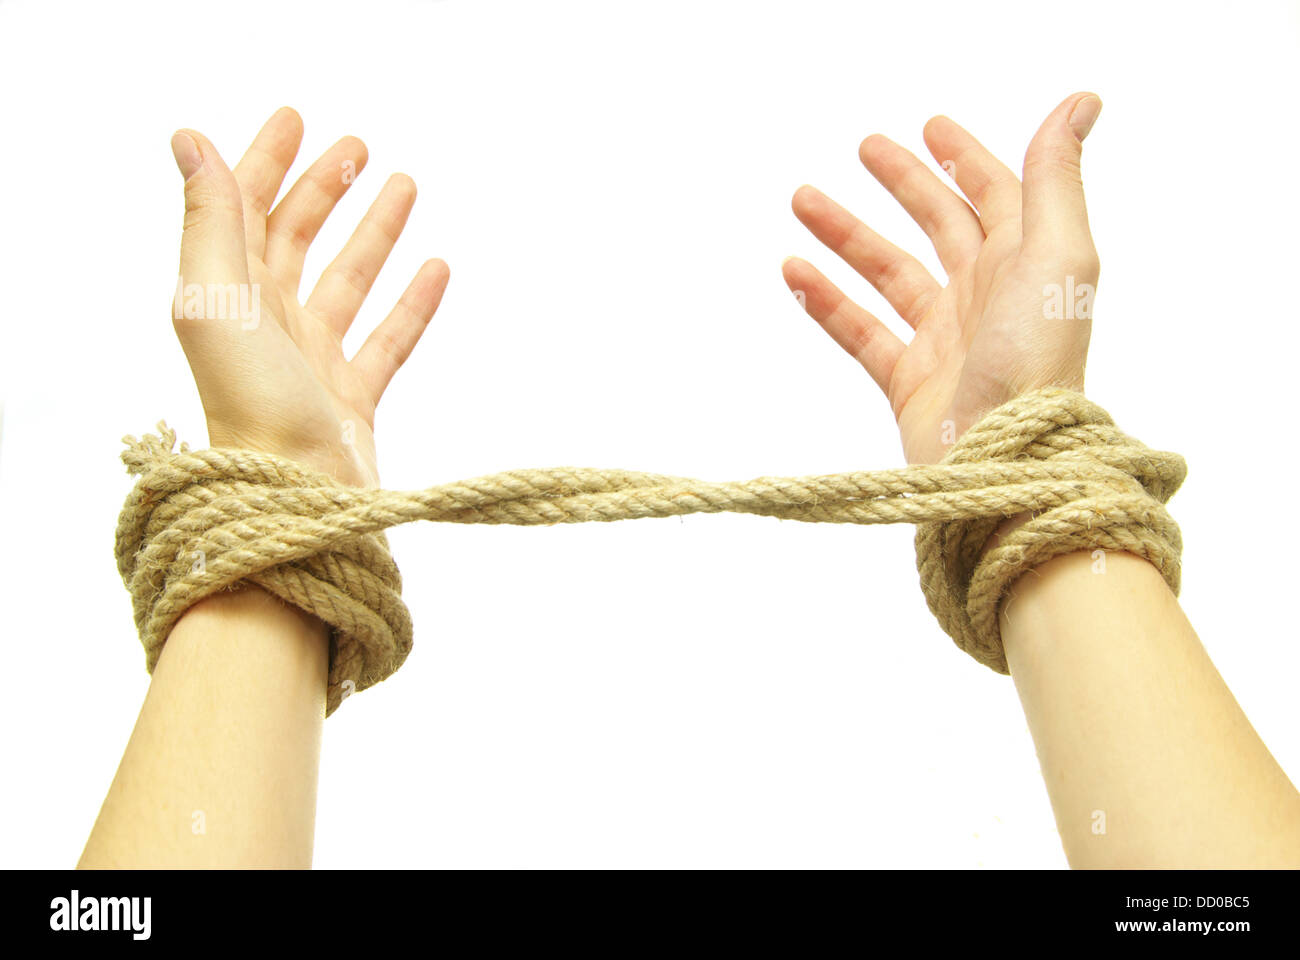 hands in rope Stock Photo